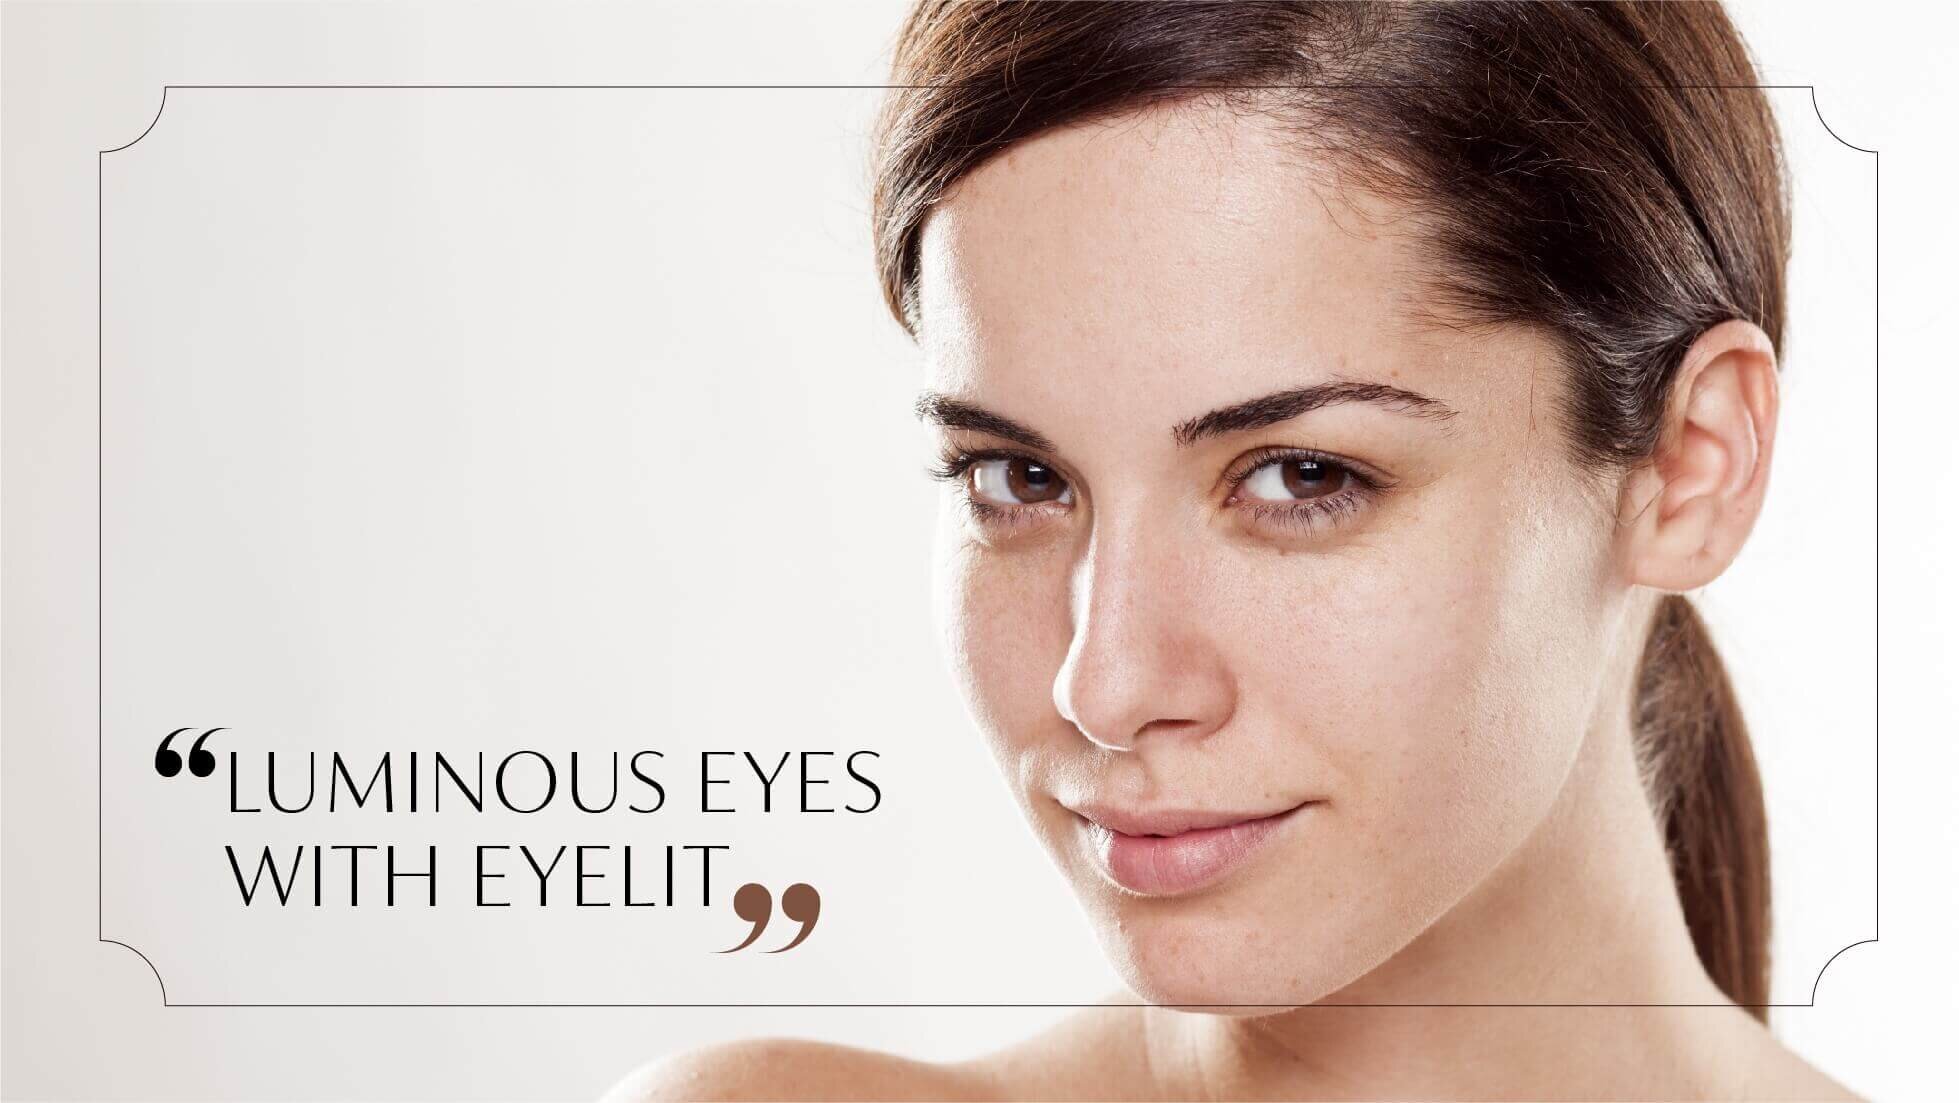 What are Under-Eye Circles?